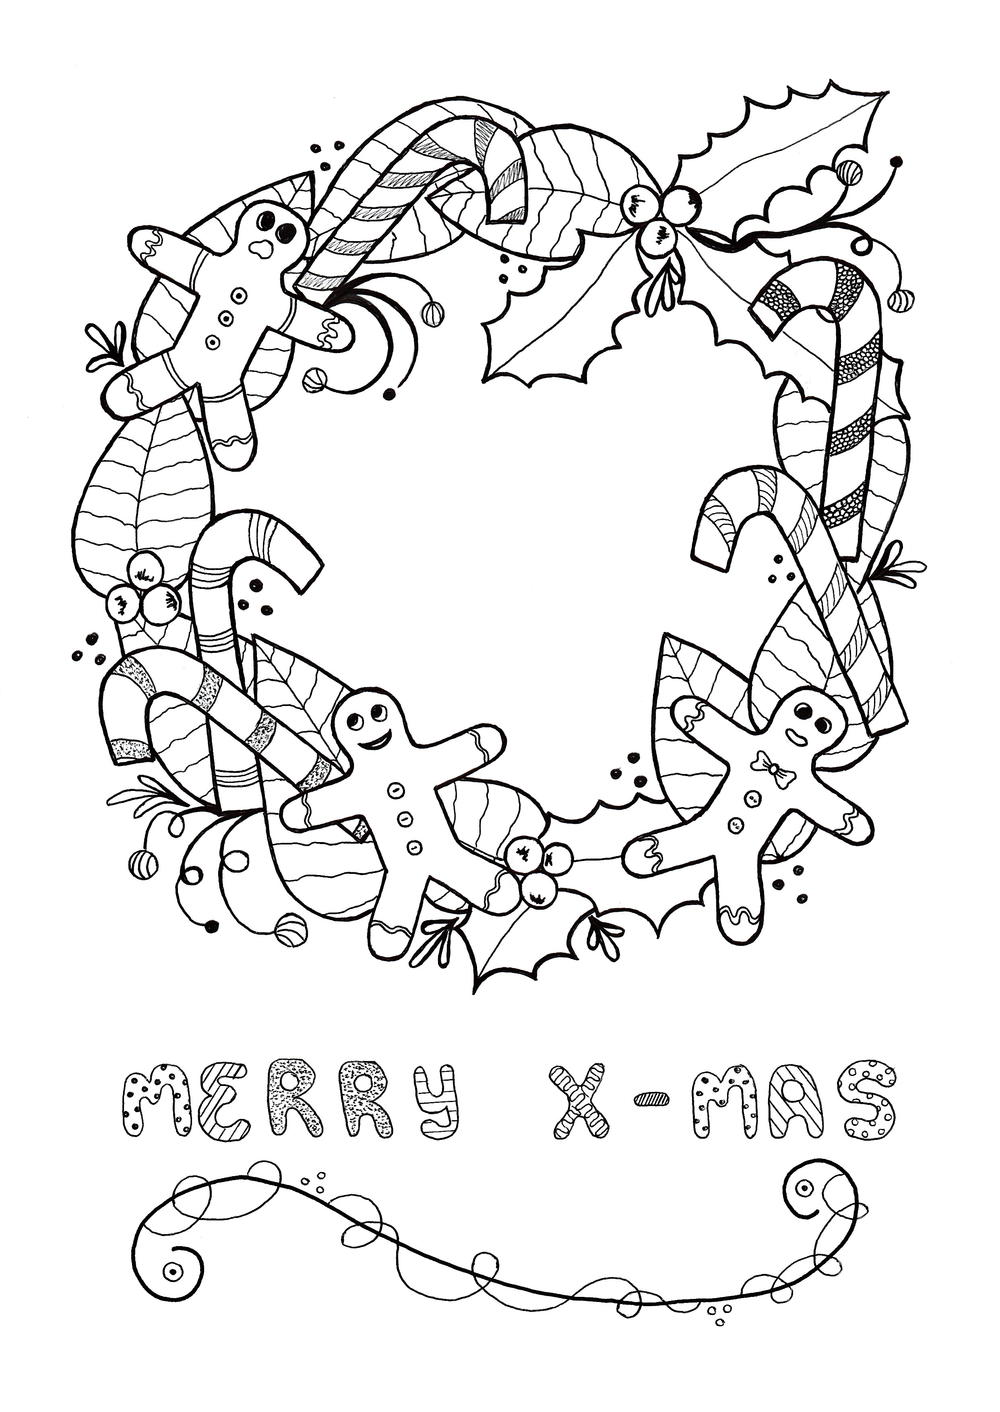 christmas wreath coloring pages